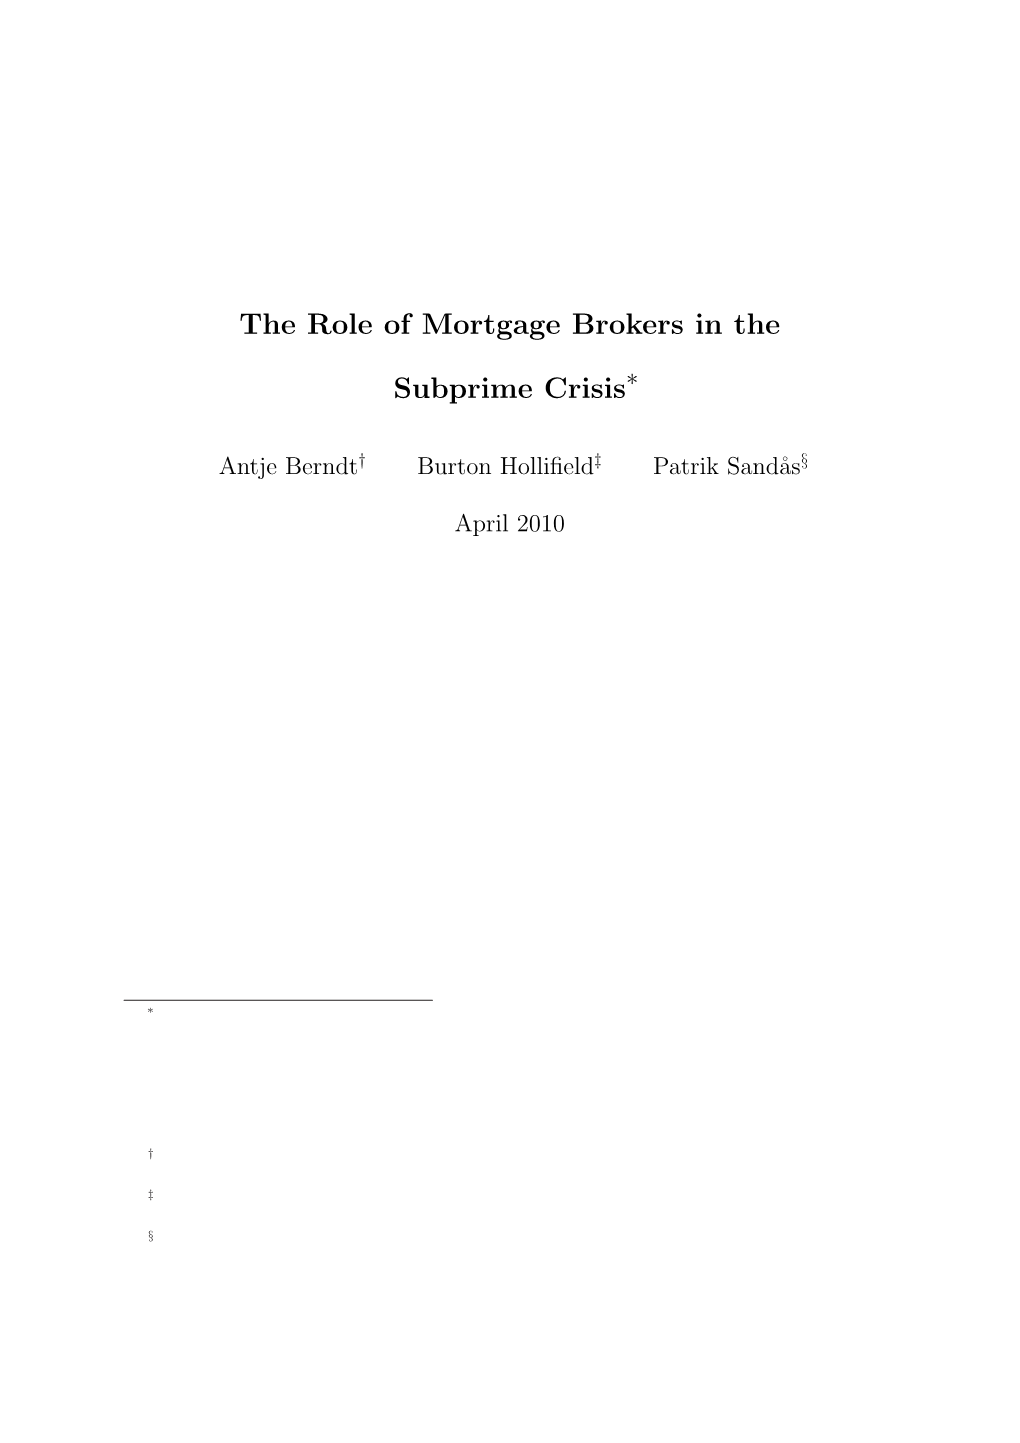 The Role of Mortgage Brokers in the Subprime Crisis